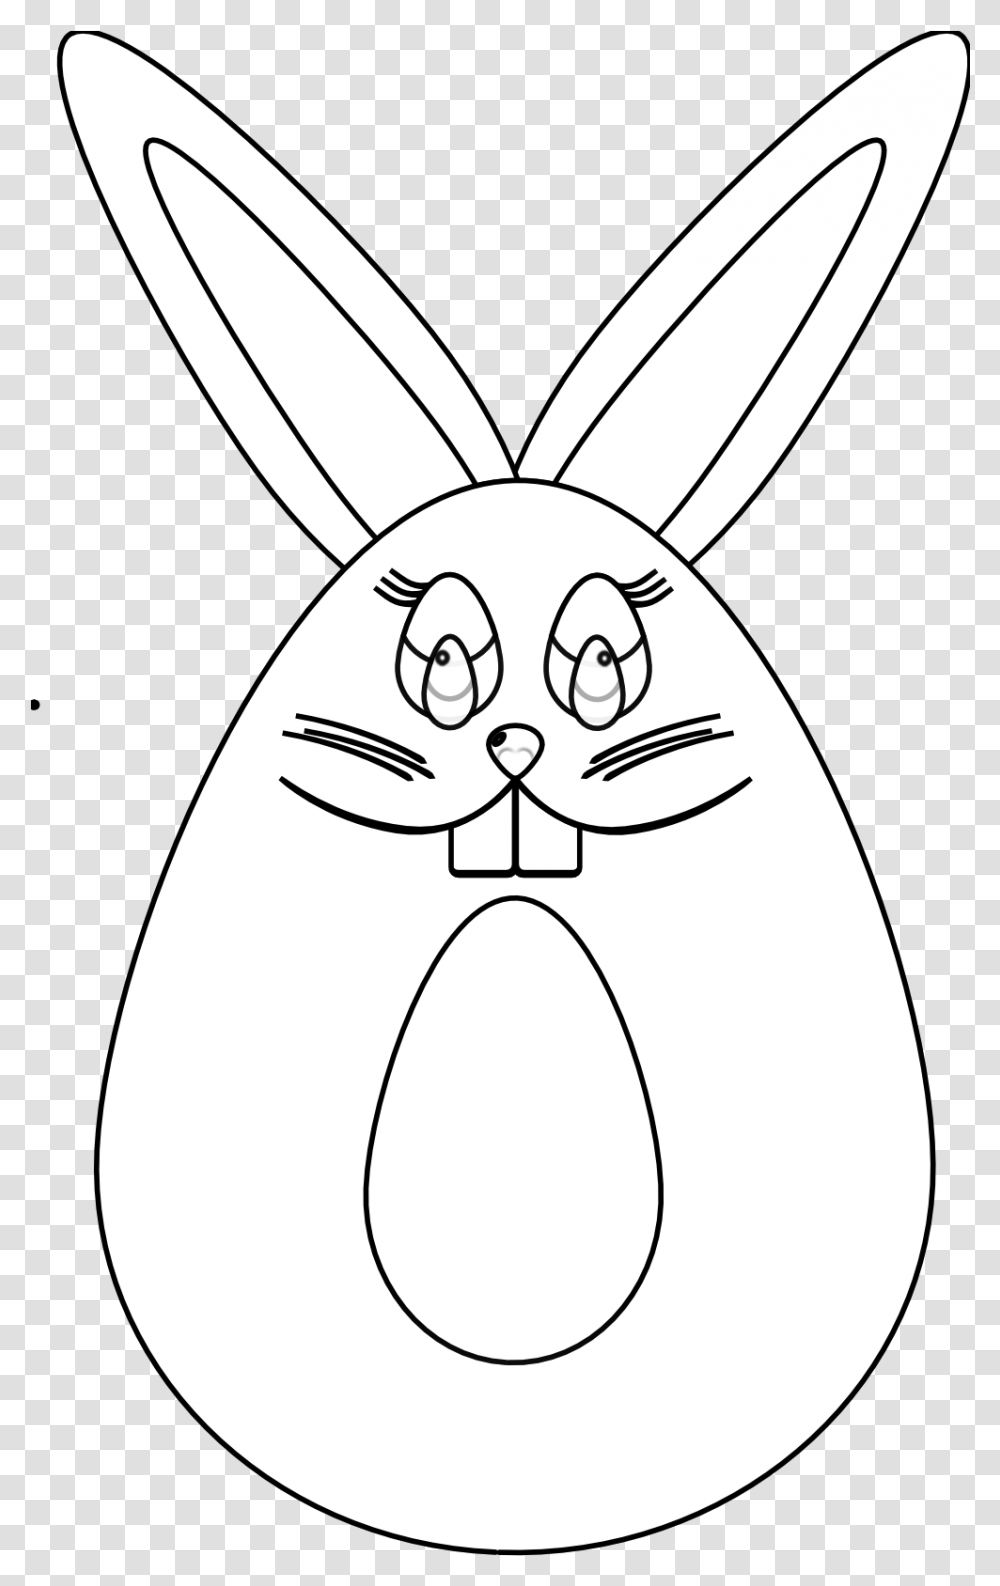 Free Black And White Bunny Pictures Download Free Clip Cartoon, Egg, Food, Stencil, Easter Egg Transparent Png